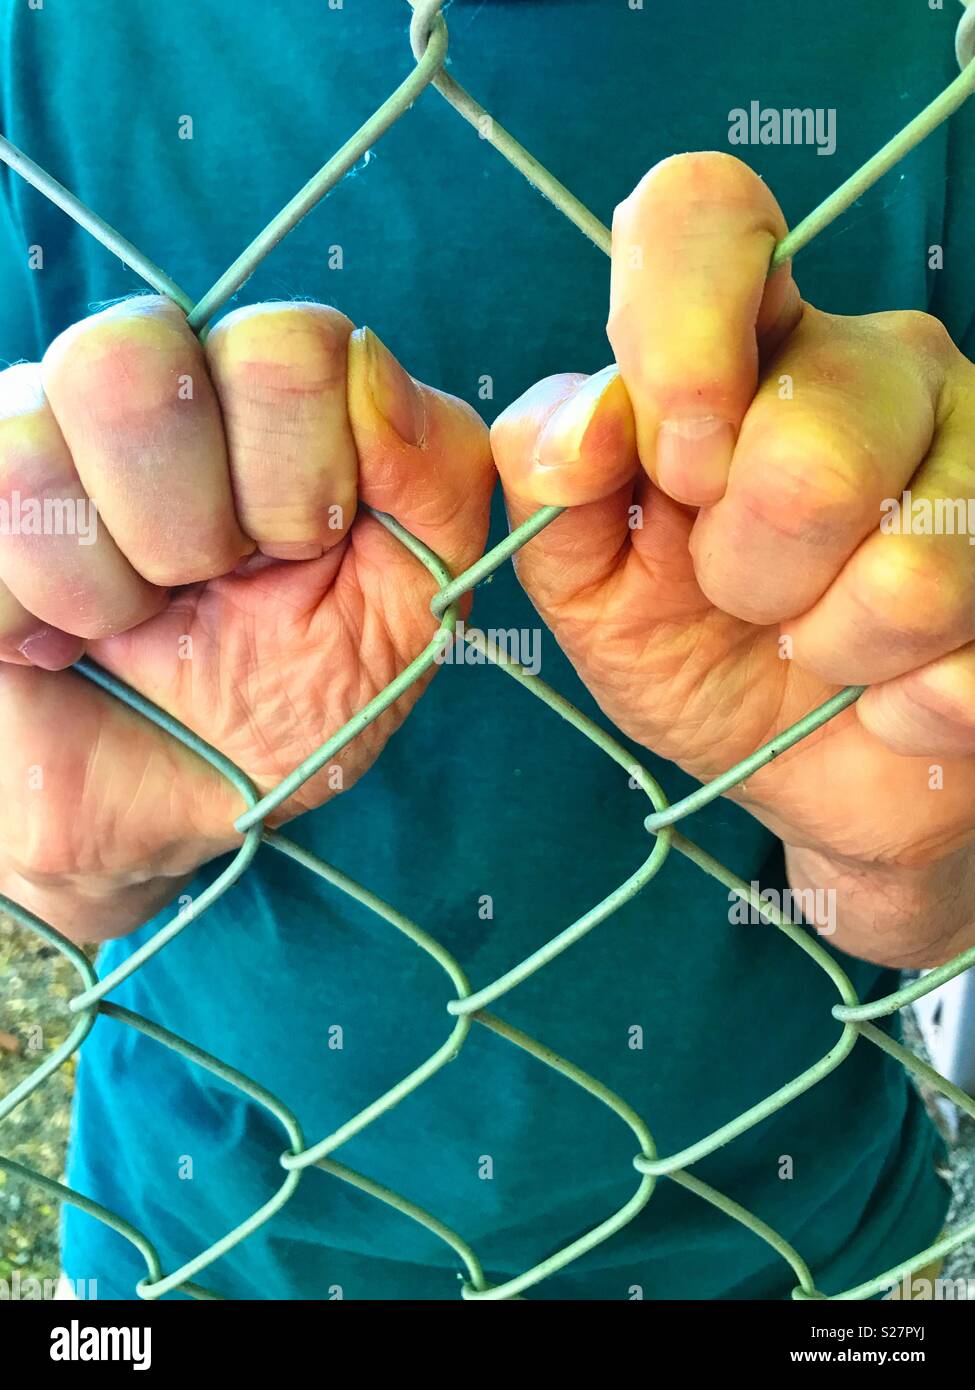 Two hands holding chain link fence Stock Photo